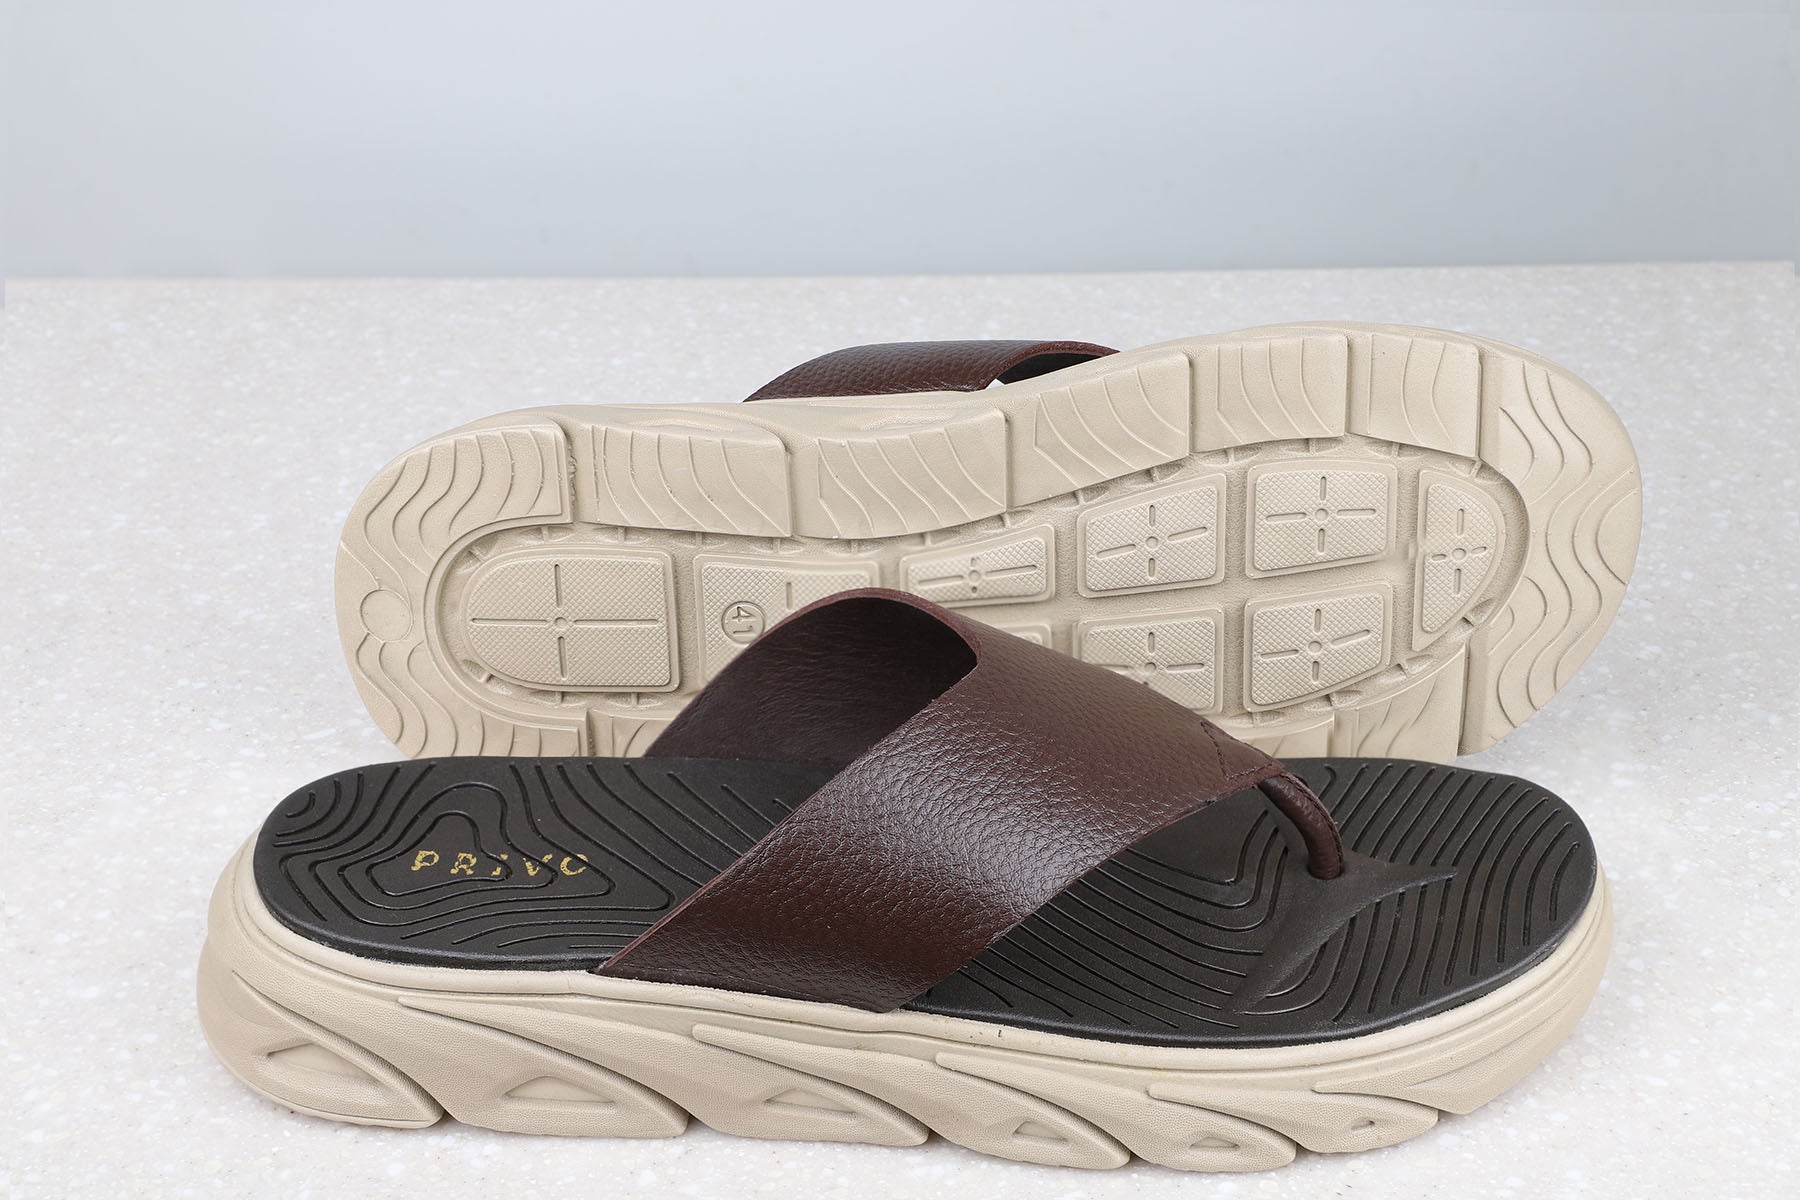 CASUAL SLIPPERS-BROWN-Men's Slippers-Inc5 Shoes